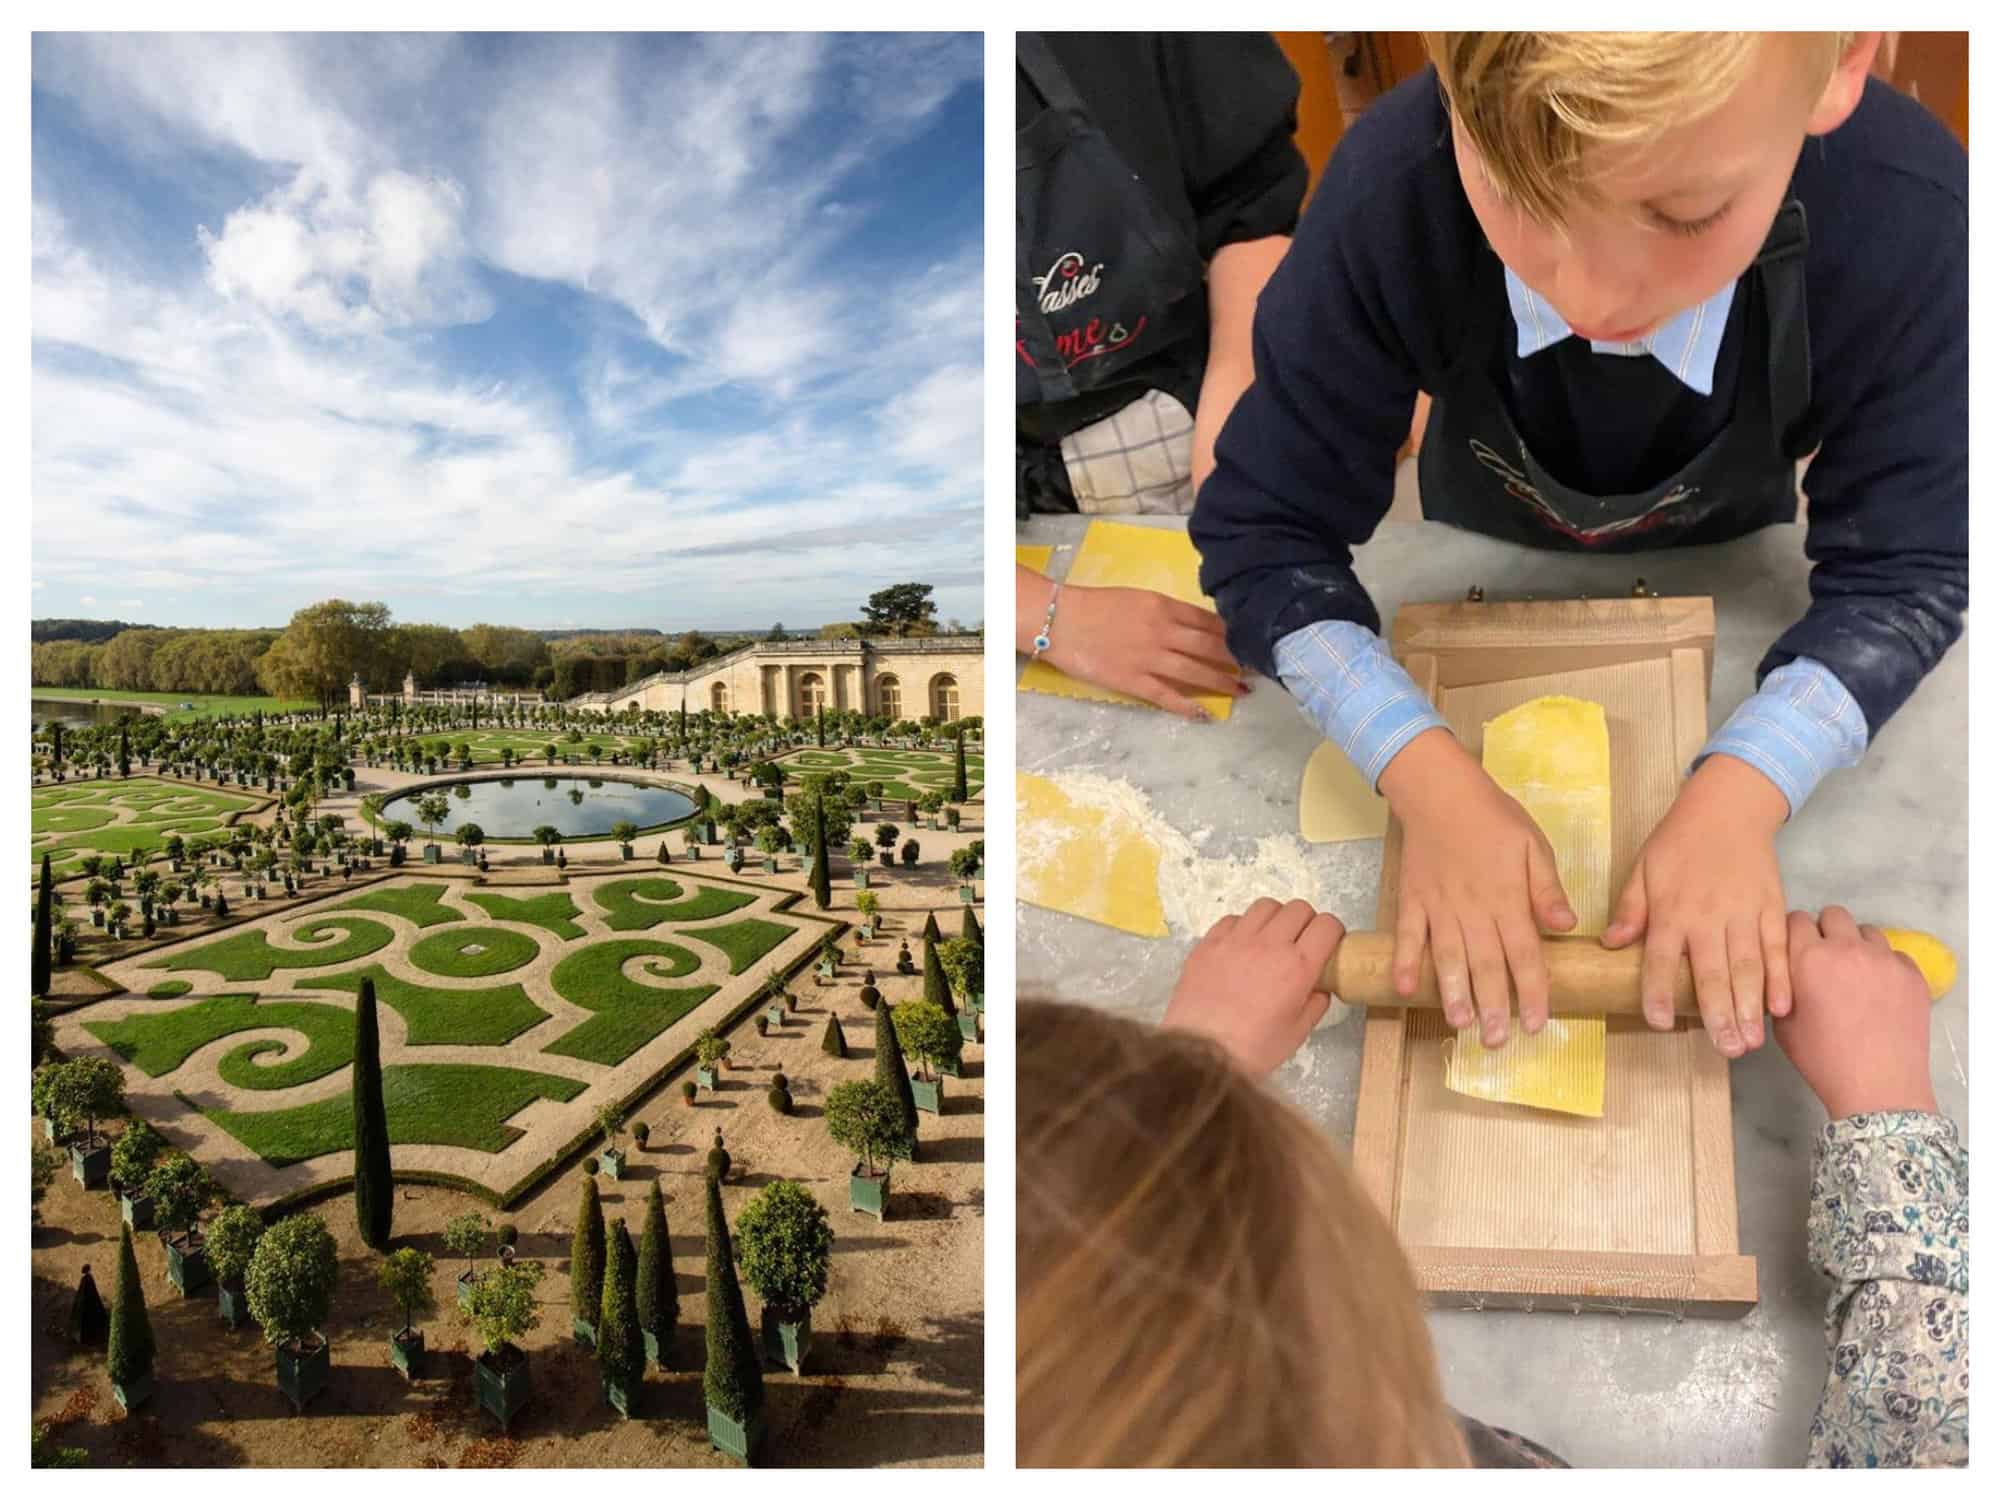 Left: A symmetrical French formal garden with a round pool. Right: 2 kids flattening some yellow pasta with a wooden rolling pin. 